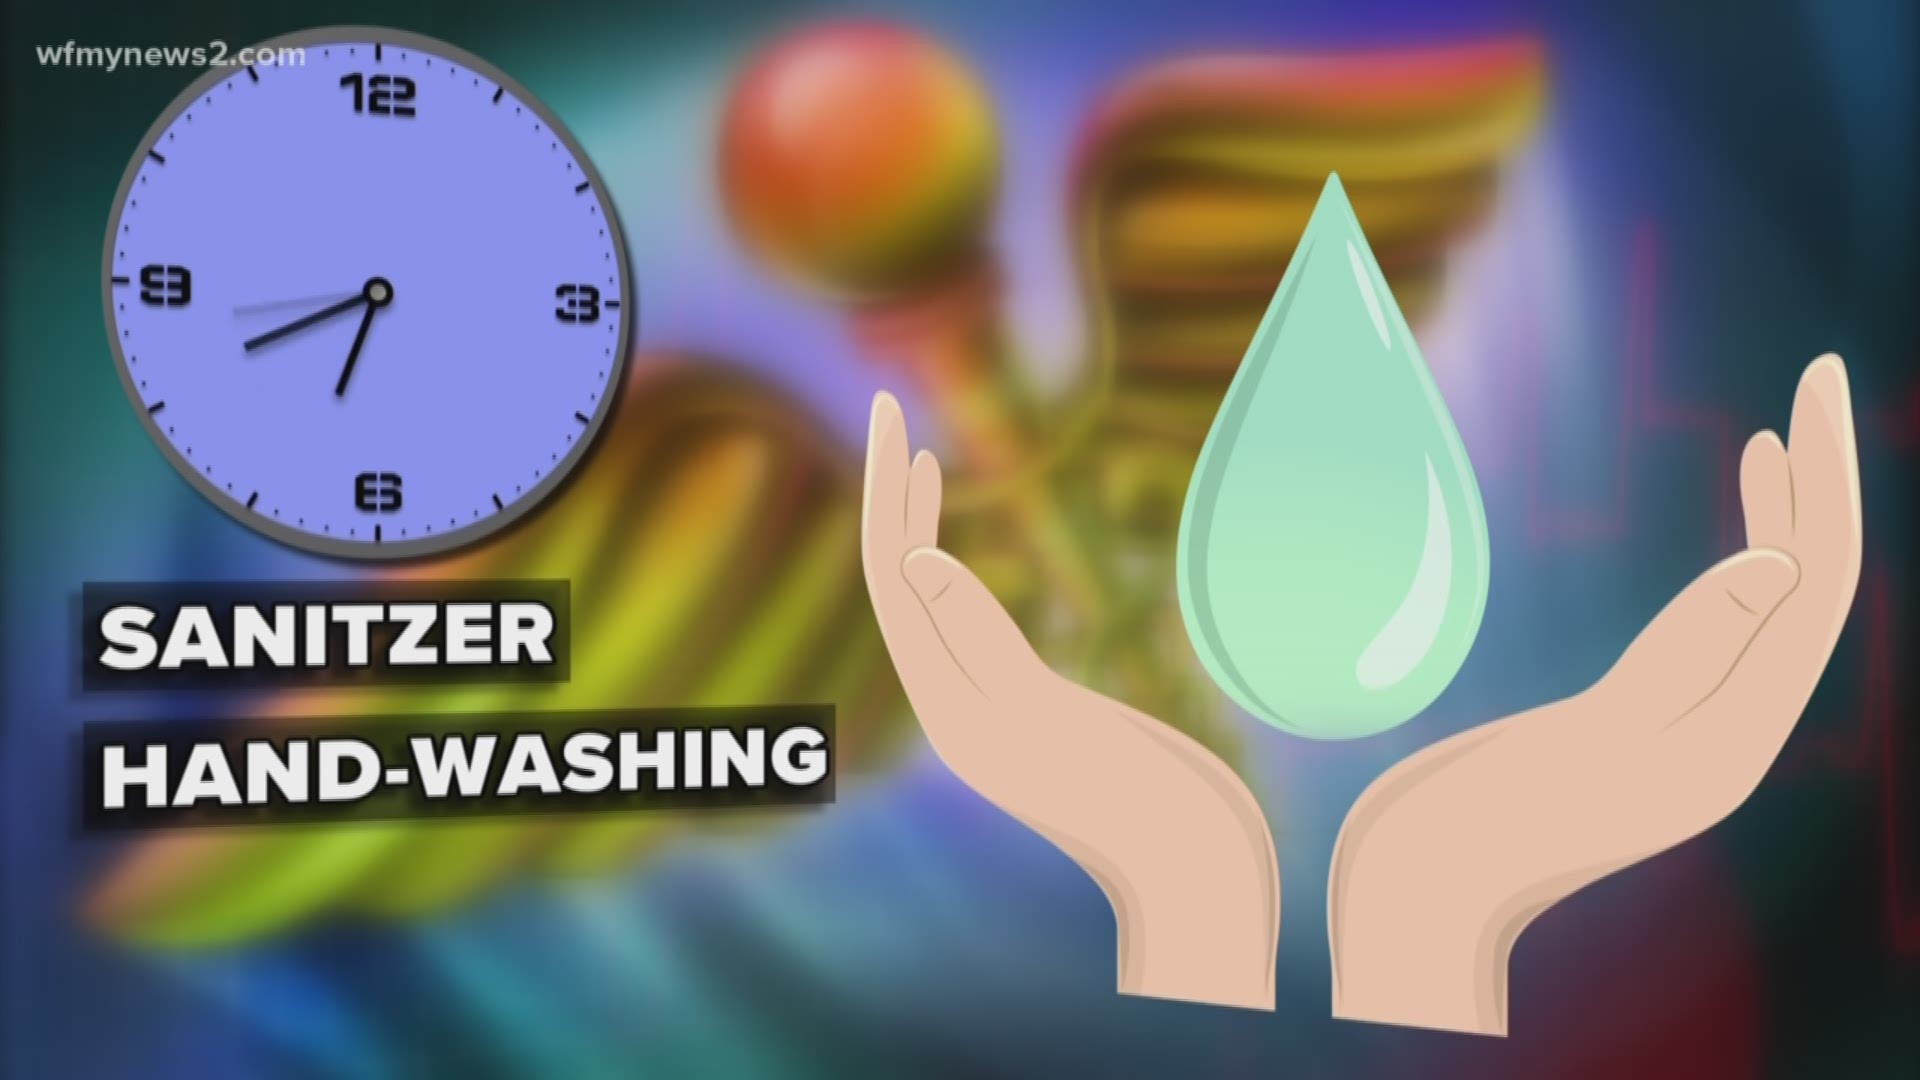 With flu season right around the corner, which is more effective to wash your hands? Soap and water, or hand sanitizer?